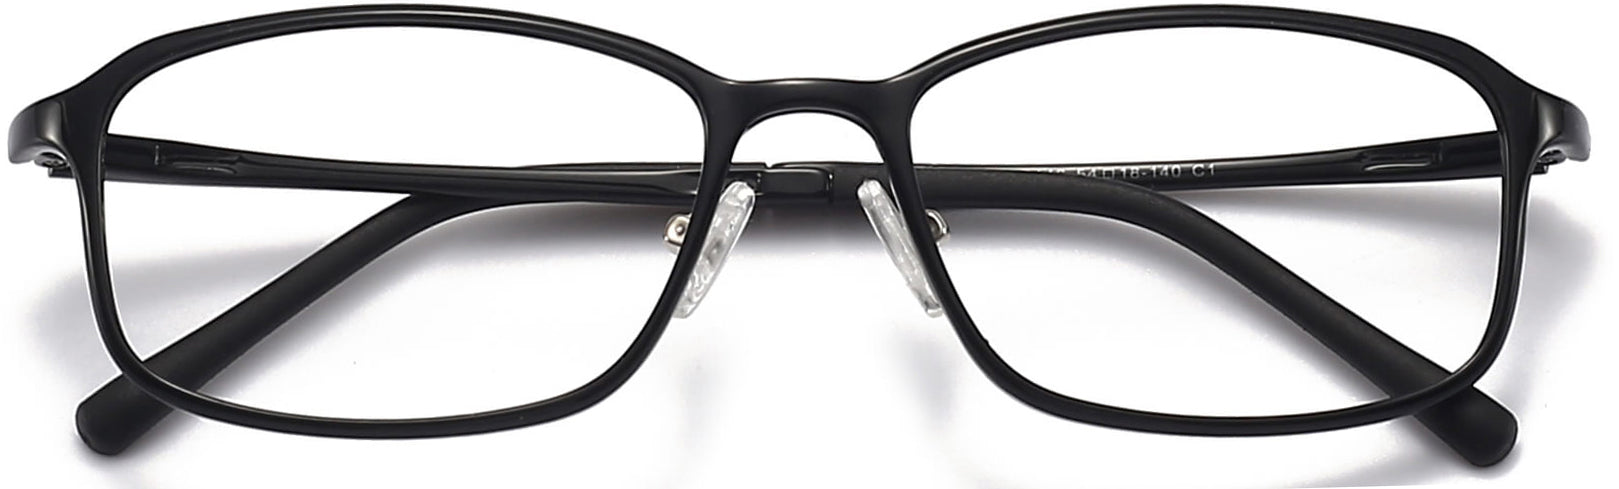 Carmelo Round Black Eyeglasses from ANRRI, closed view